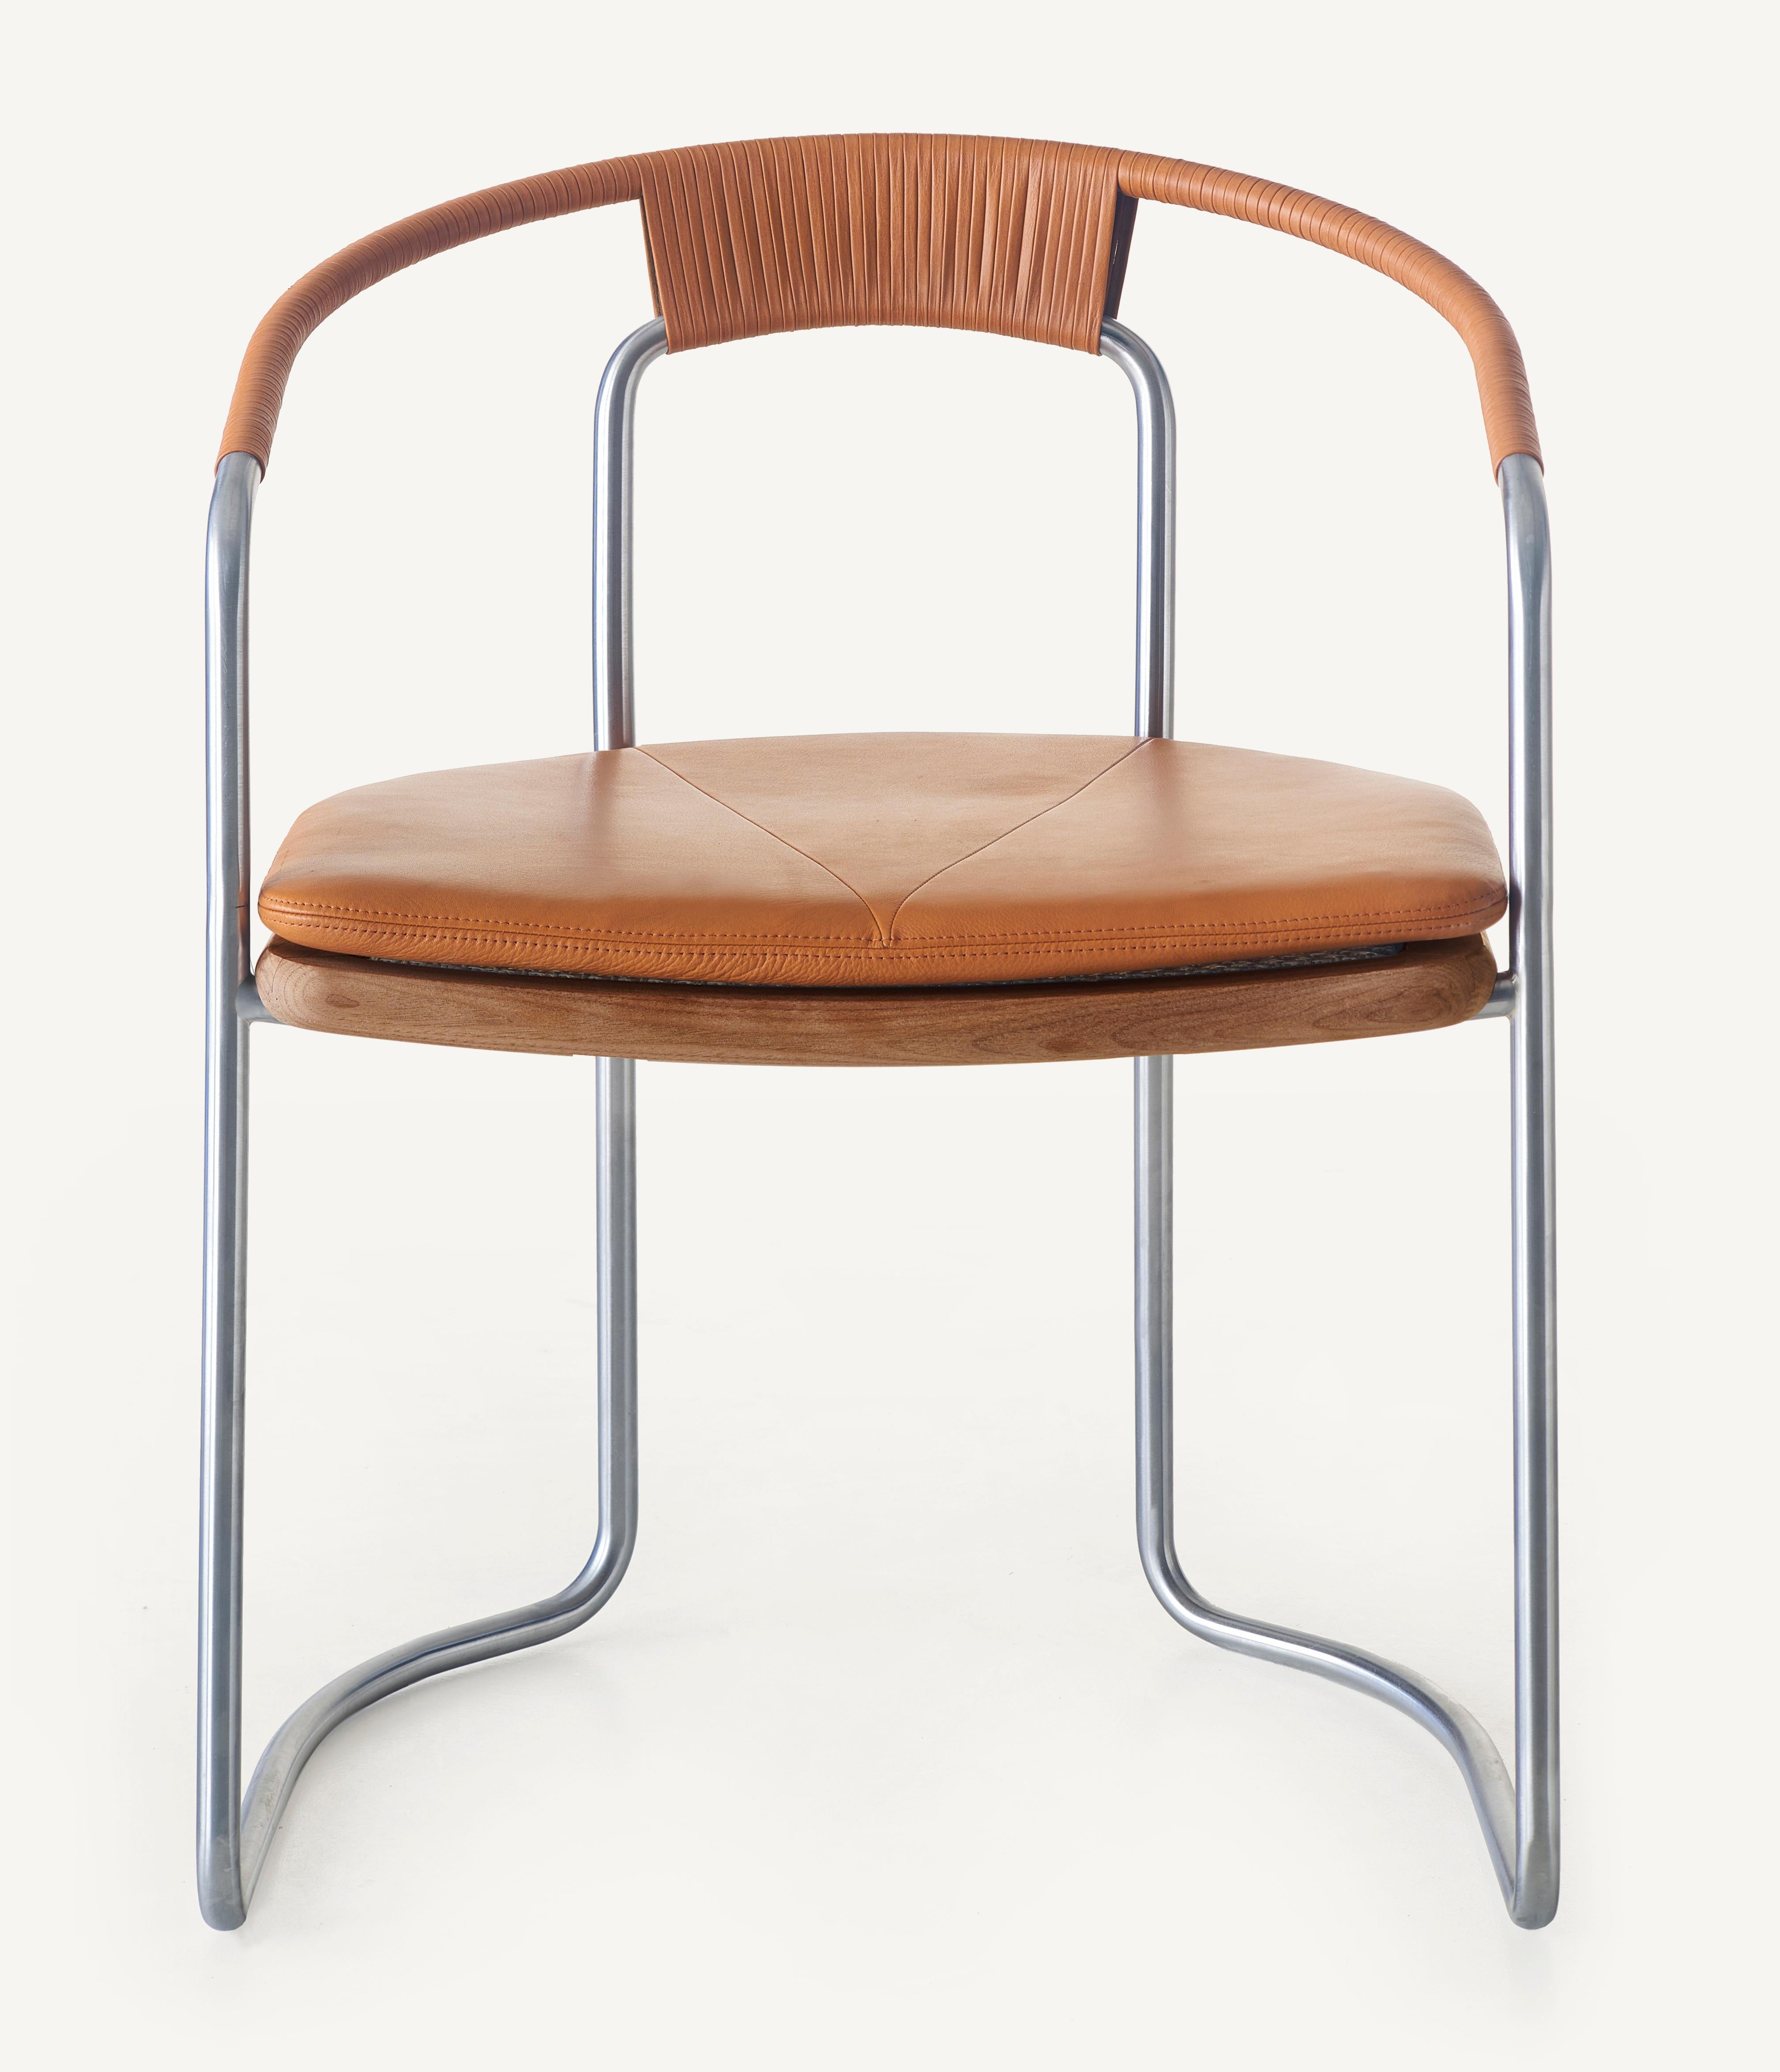 For Sale: Brown (Elegant 43807 British Tan) Geometric Chair in Walnut, Satin Nickel and Leather by Craig Bassam 3